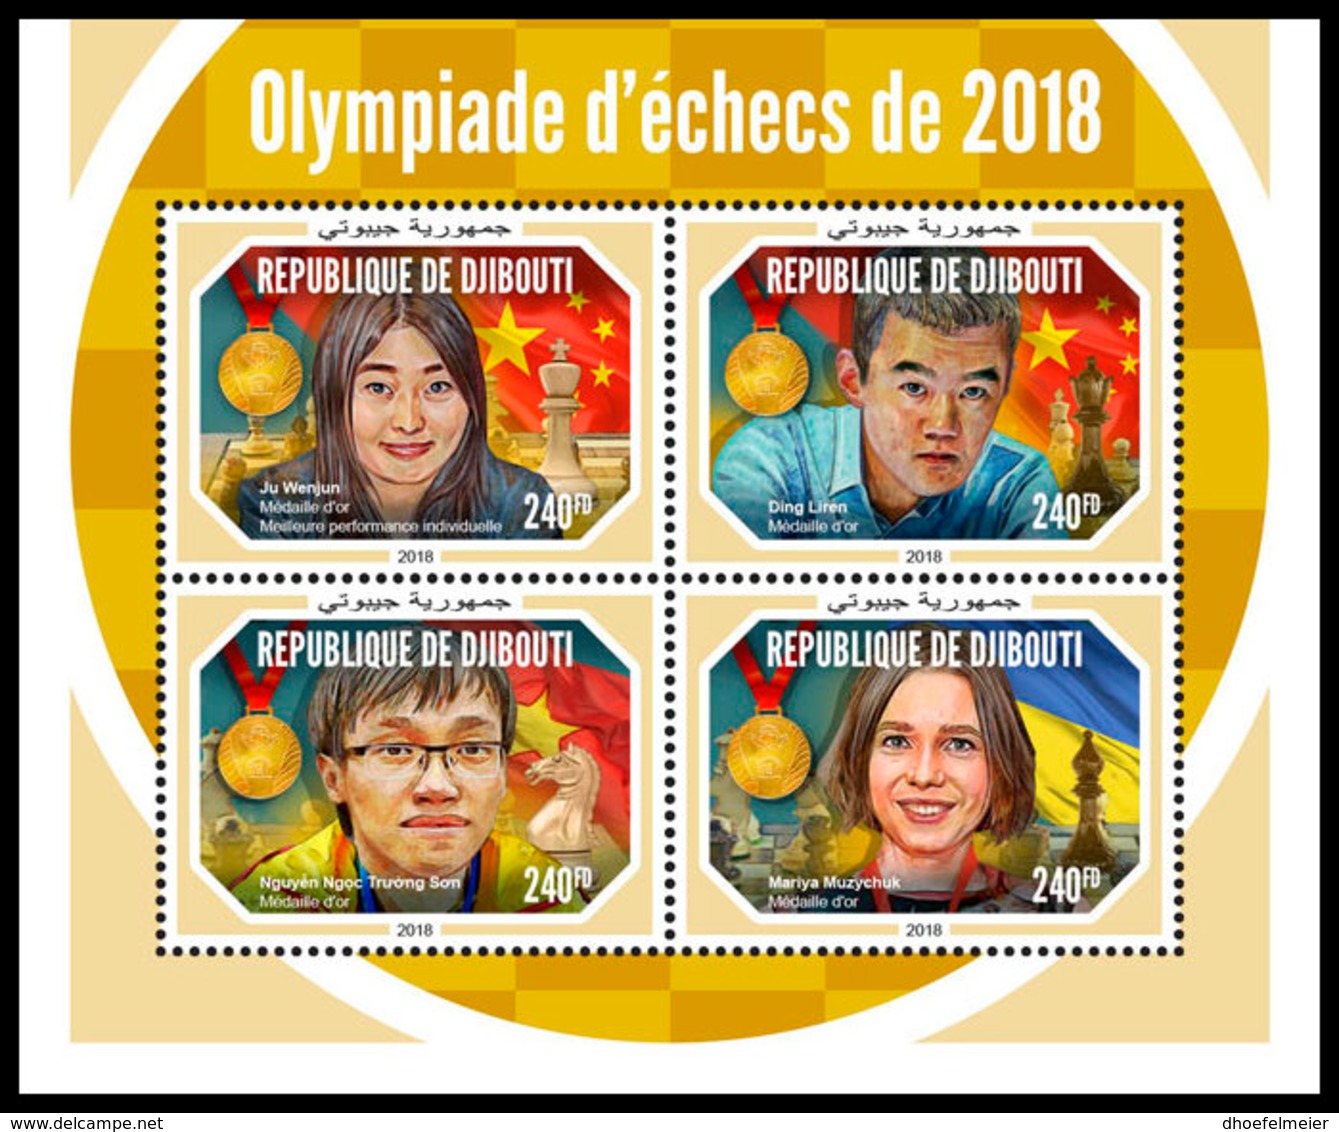 DJIBOUTI 2018 MNH Chess Olympiad Schach Olympiade De Echecs 2018 M/S - IMPERFORATED - DH1904 - Echecs